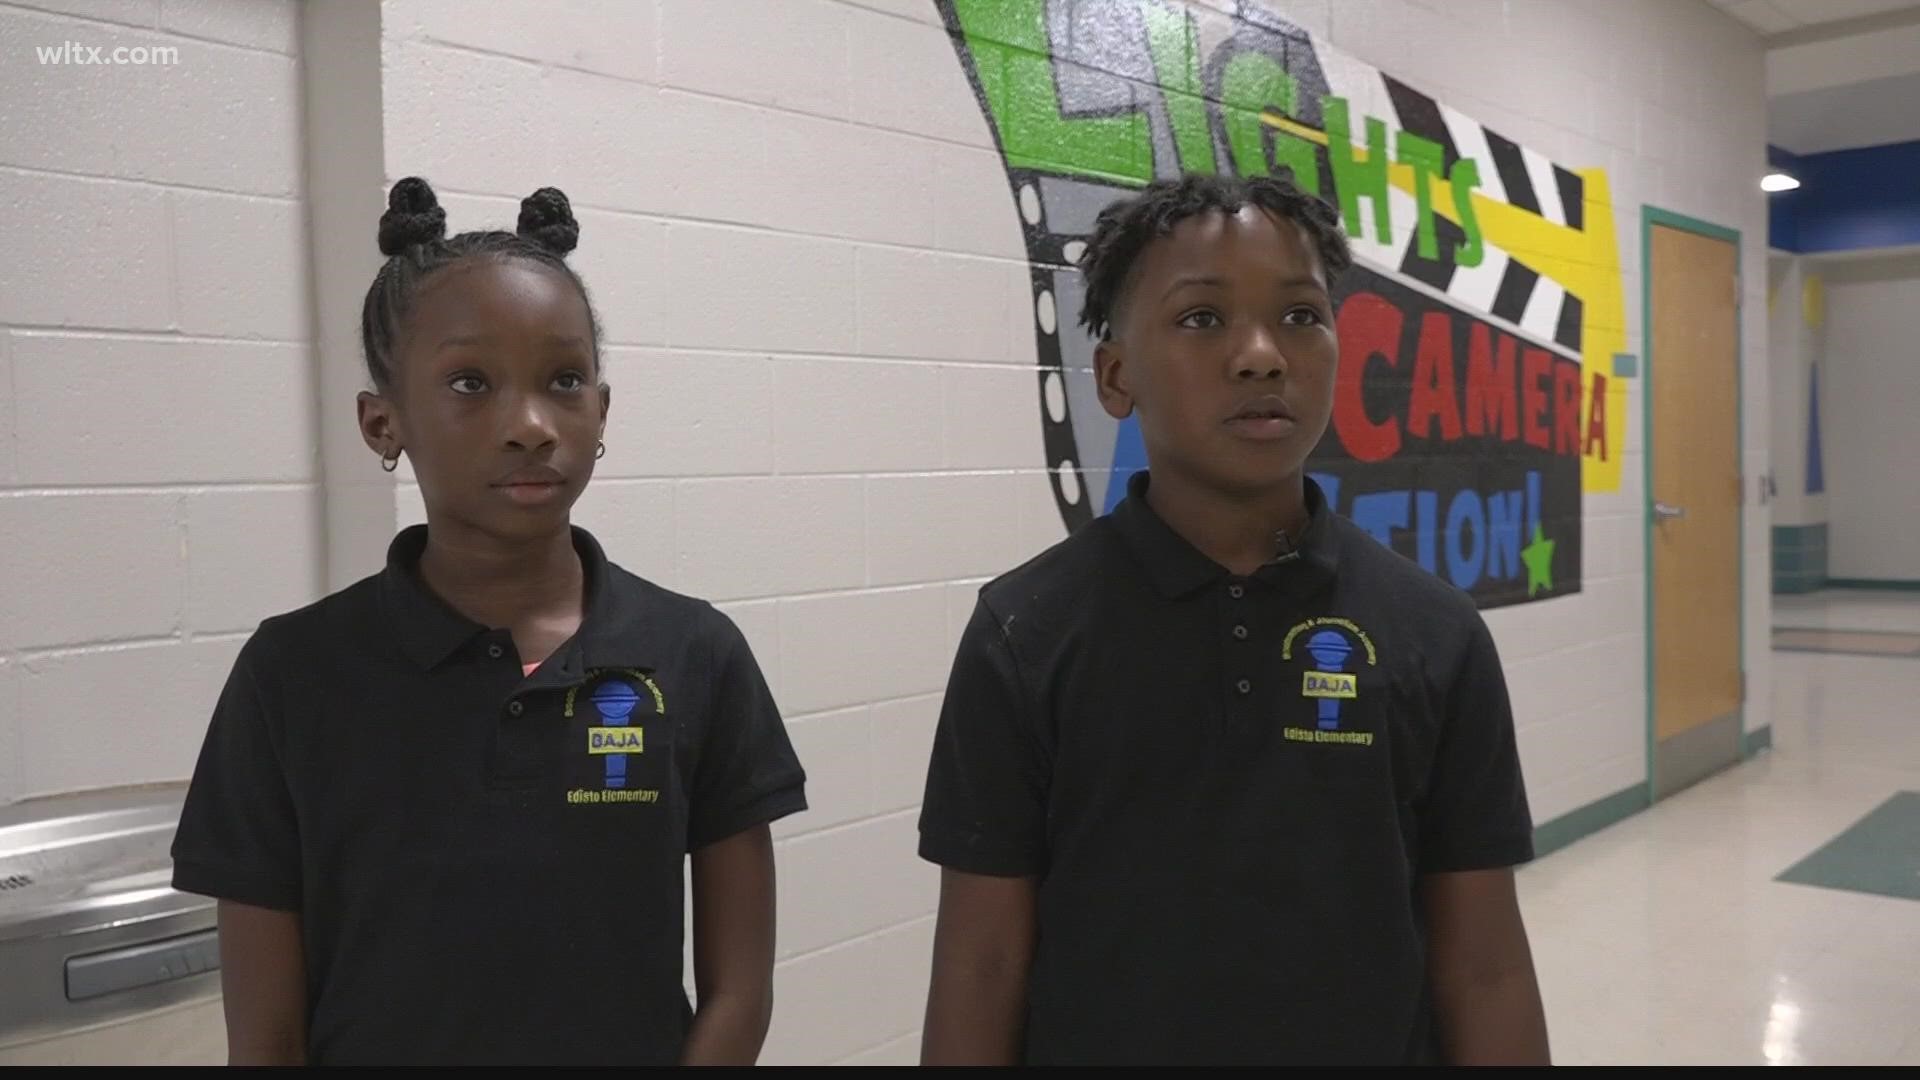 Edisto Elementary school students who think they might want to be journalists are getting some help, experience from Claflin University students.